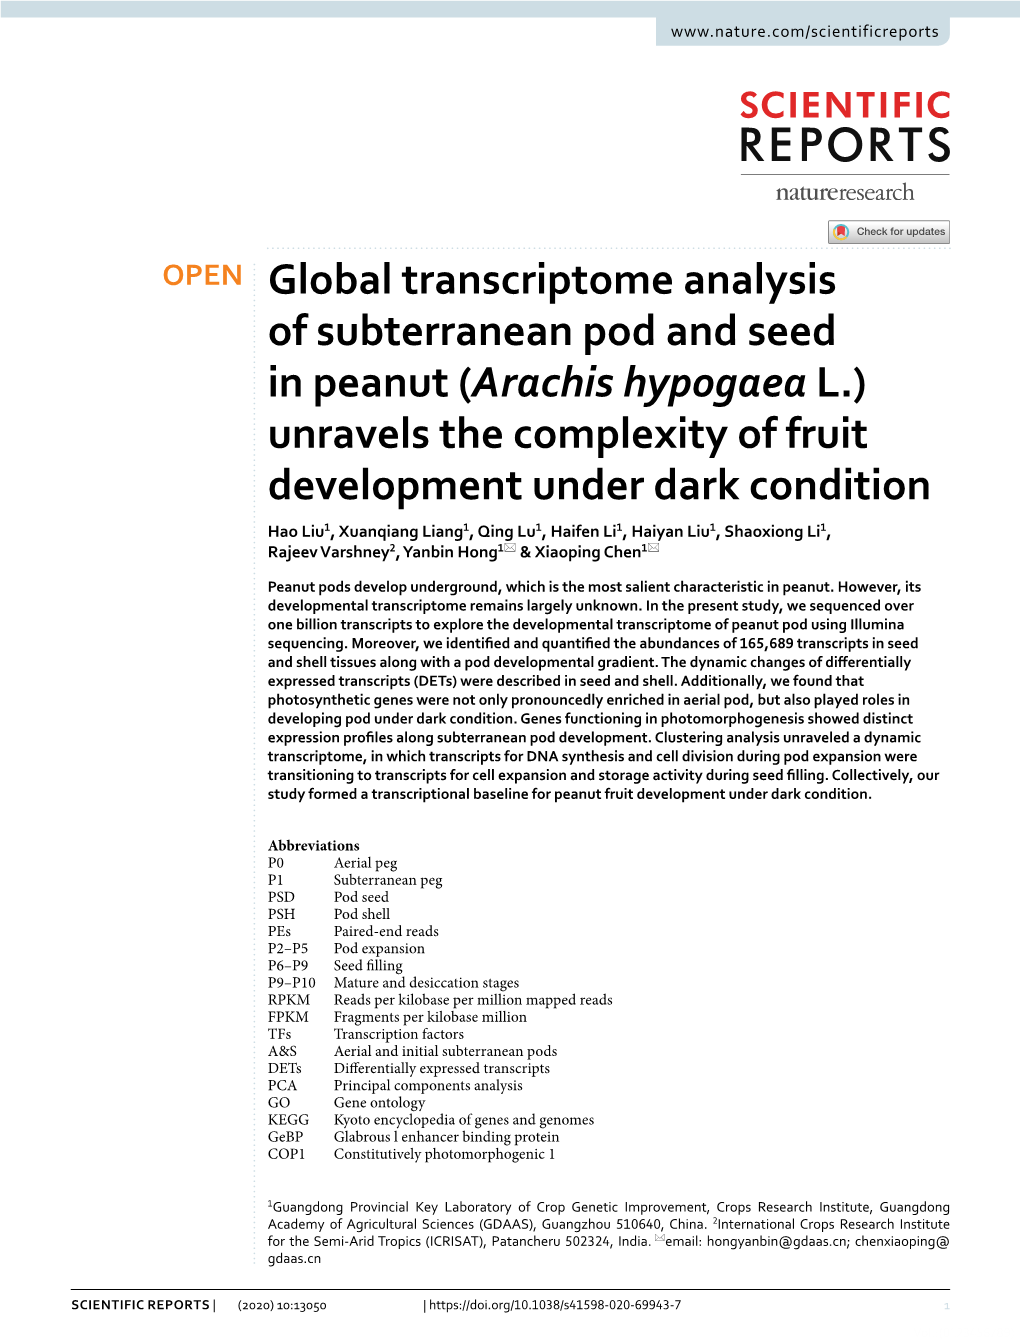 Global Transcriptome Analysis of Subterranean Pod and Seed in Peanut